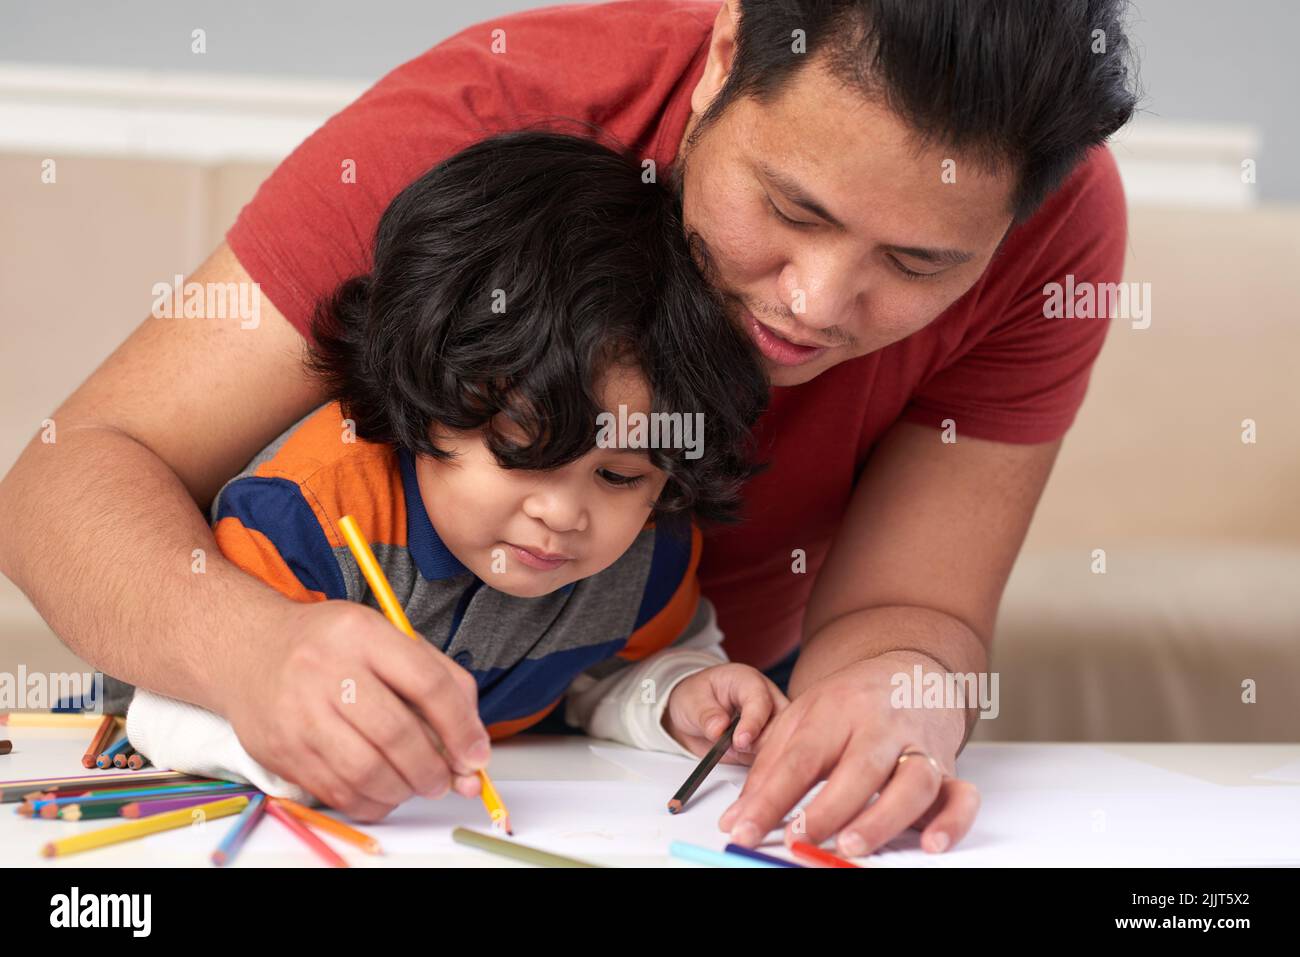 Filipino father and son drawing together with pencils Stock Photo